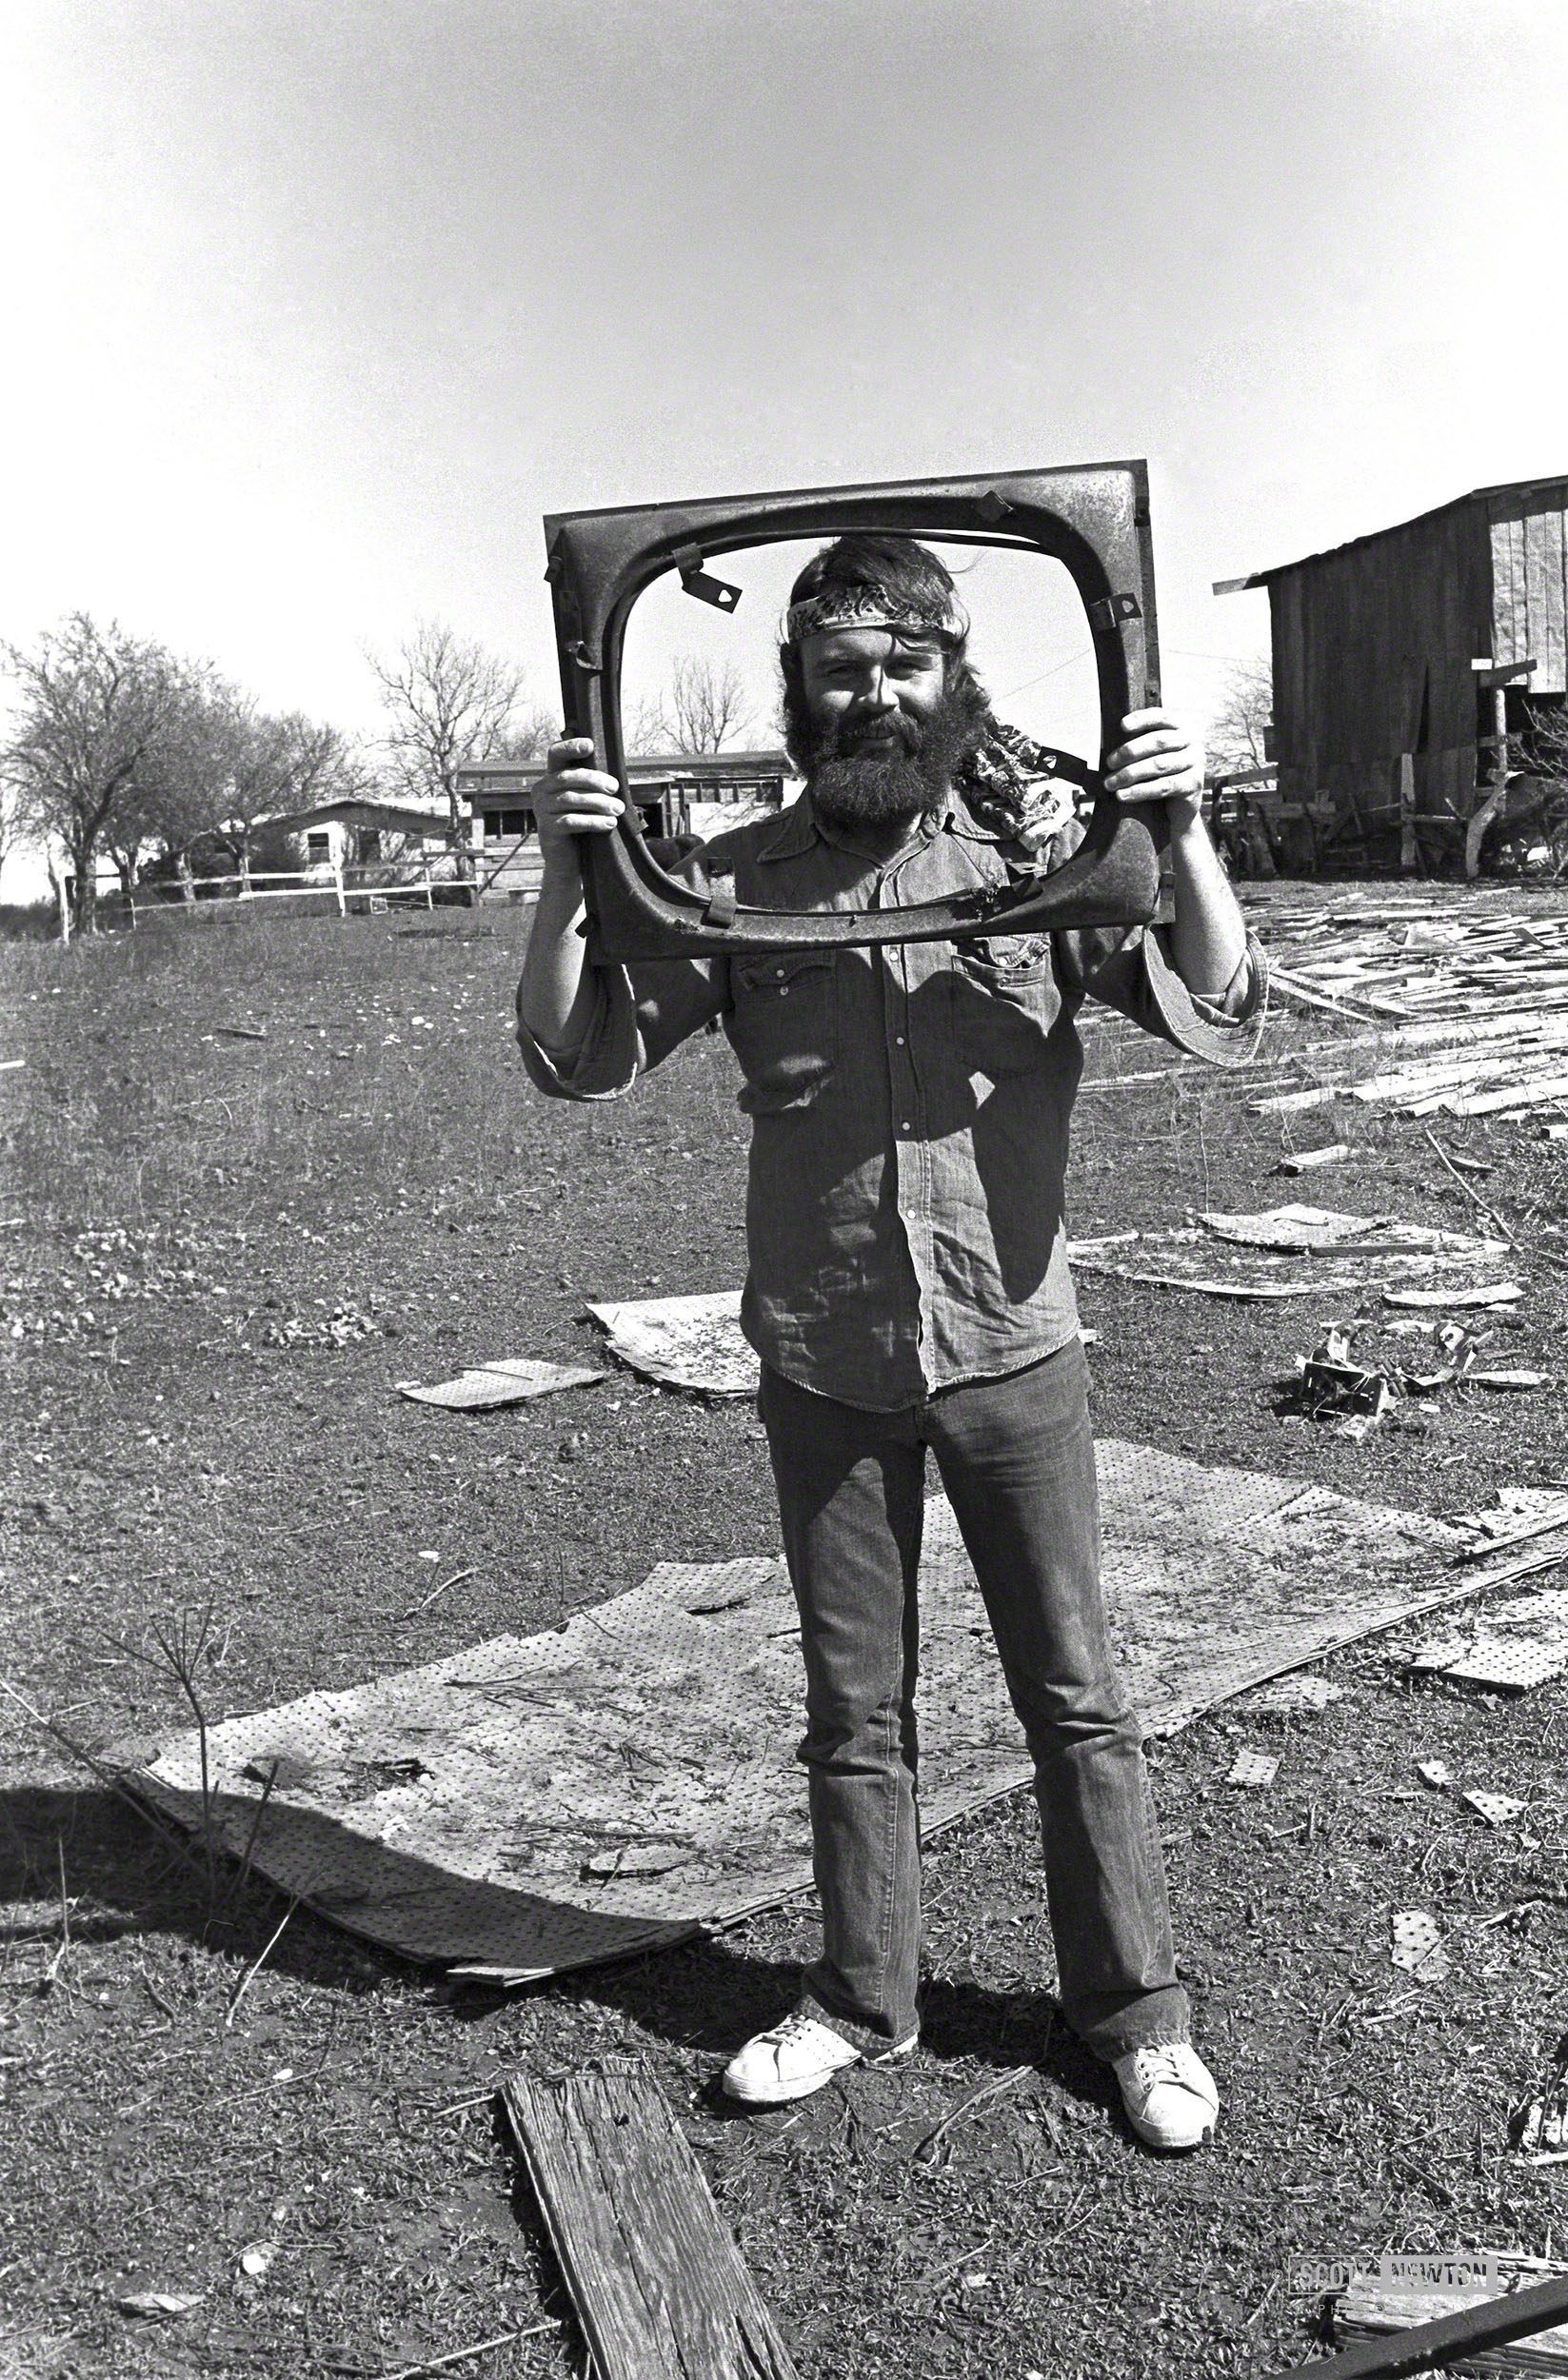 Billy Callery, north of Austin 1975